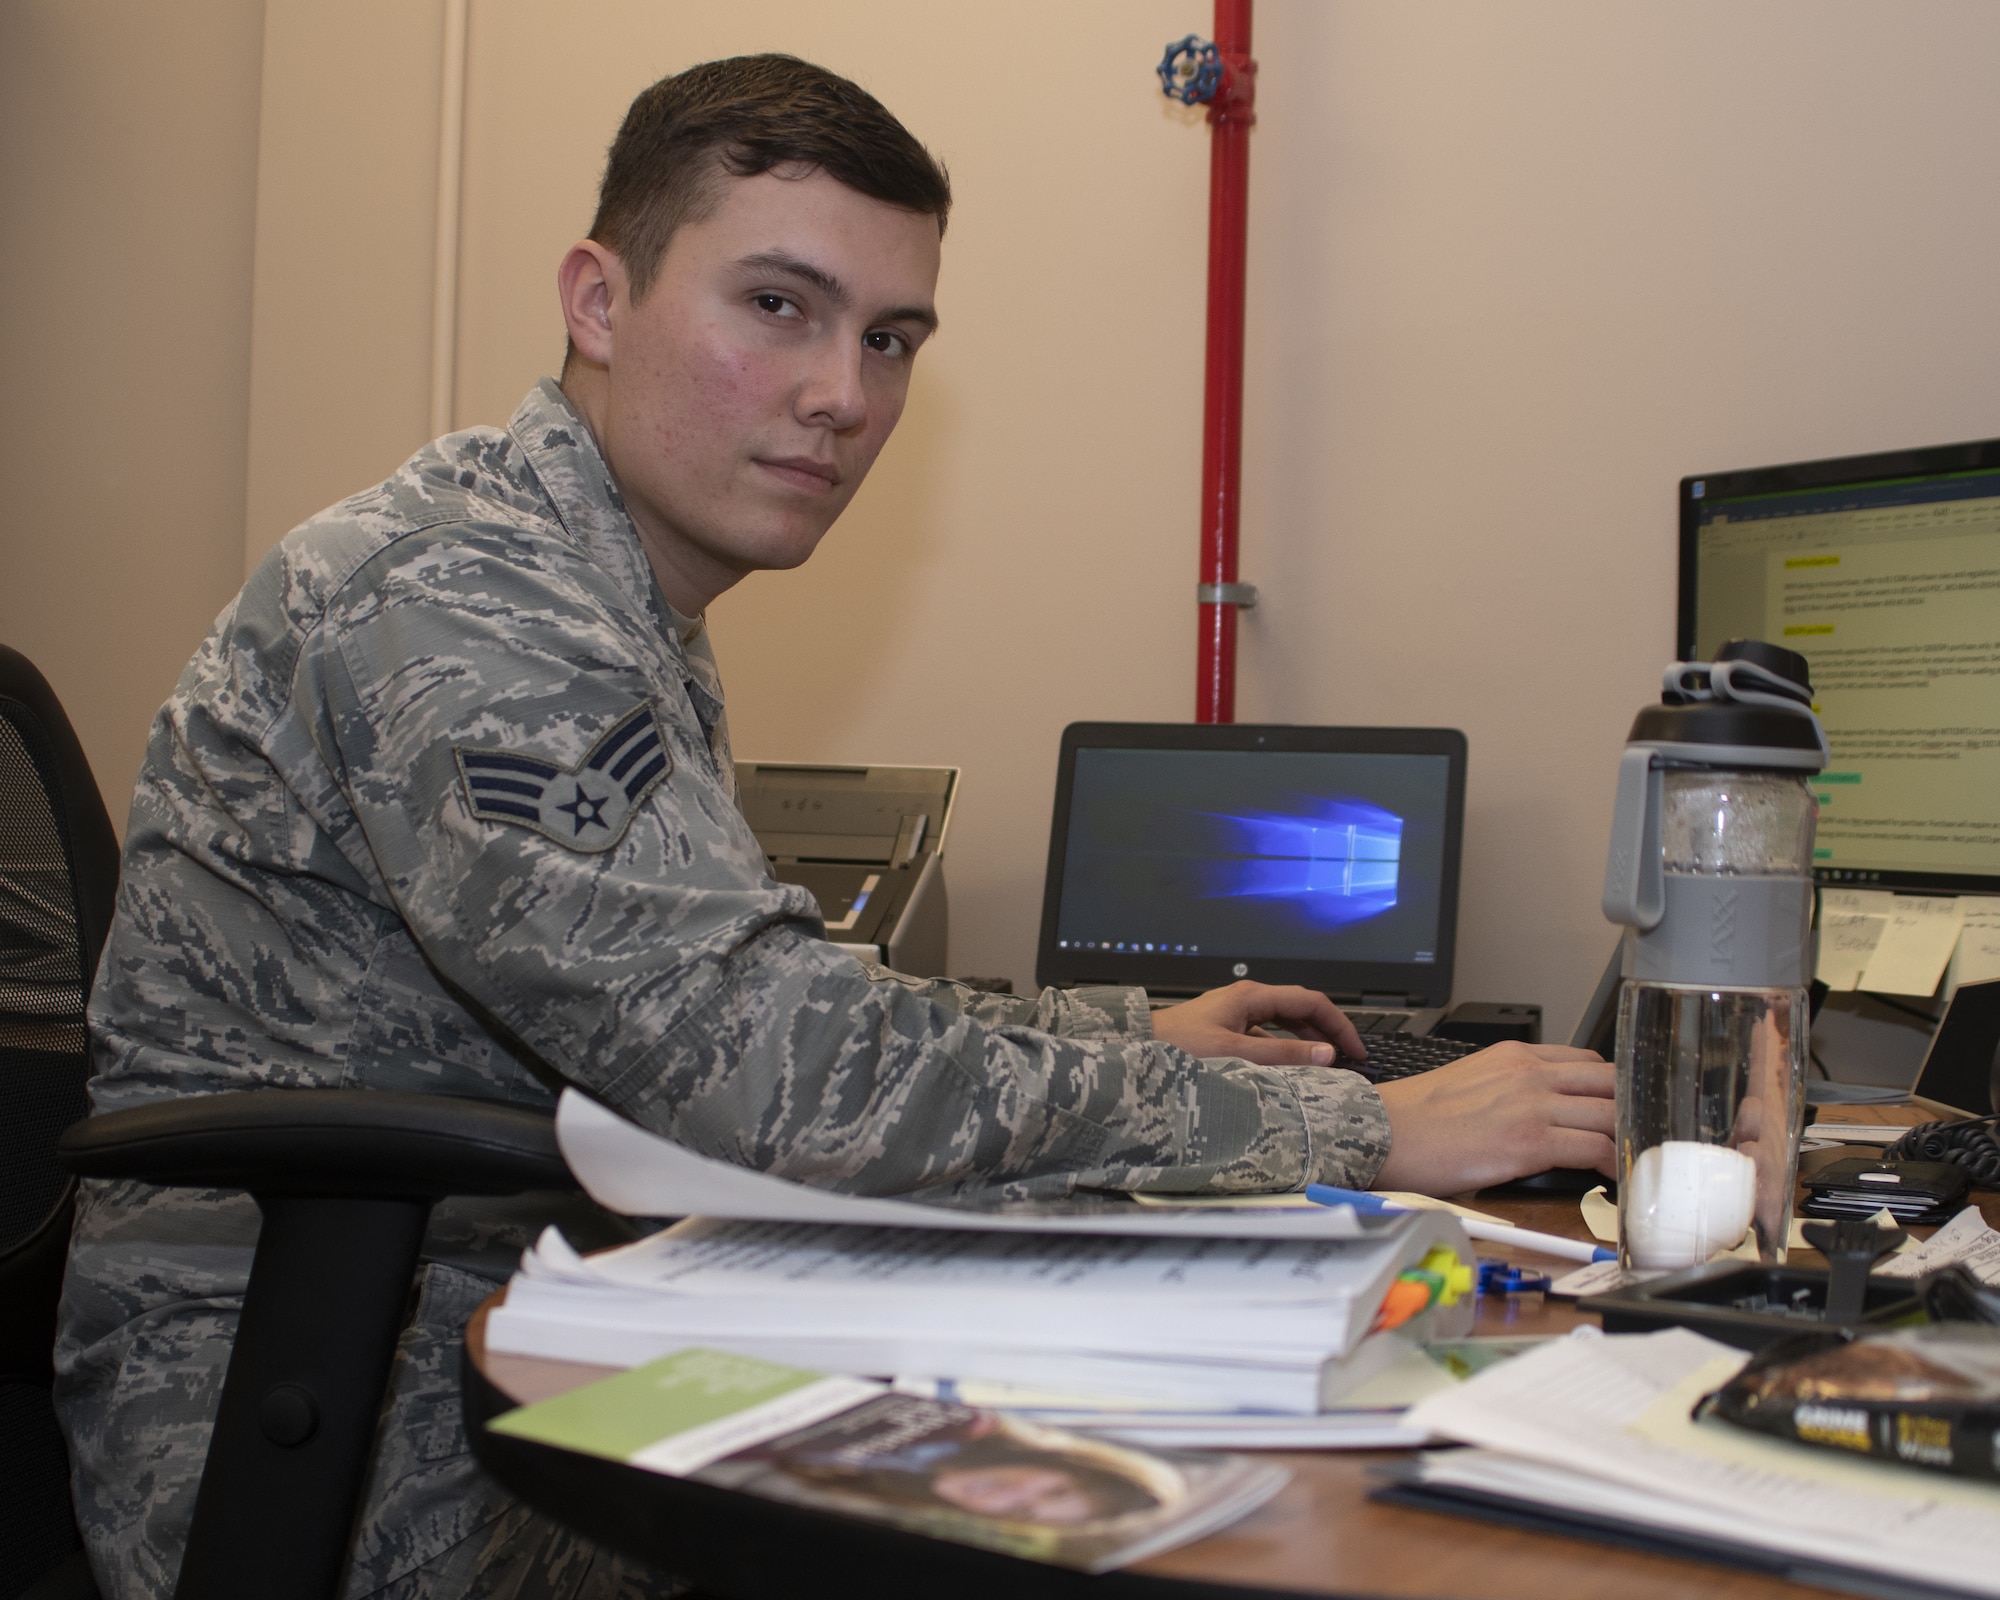 U.S. Air Force Senior Airman Michael Padgett, 81st Communications Squadron client systems technician, poses for a picture on Keesler Air Force Base, Mississippi, April 25, 2019. Padgett received the 2019 Military Volunteer of the Year award for the City of Biloxi, for his selfless dedication to volunteering in the local community. (U.S. Air Force photo by Airman 1st Class Spencer Tobler)